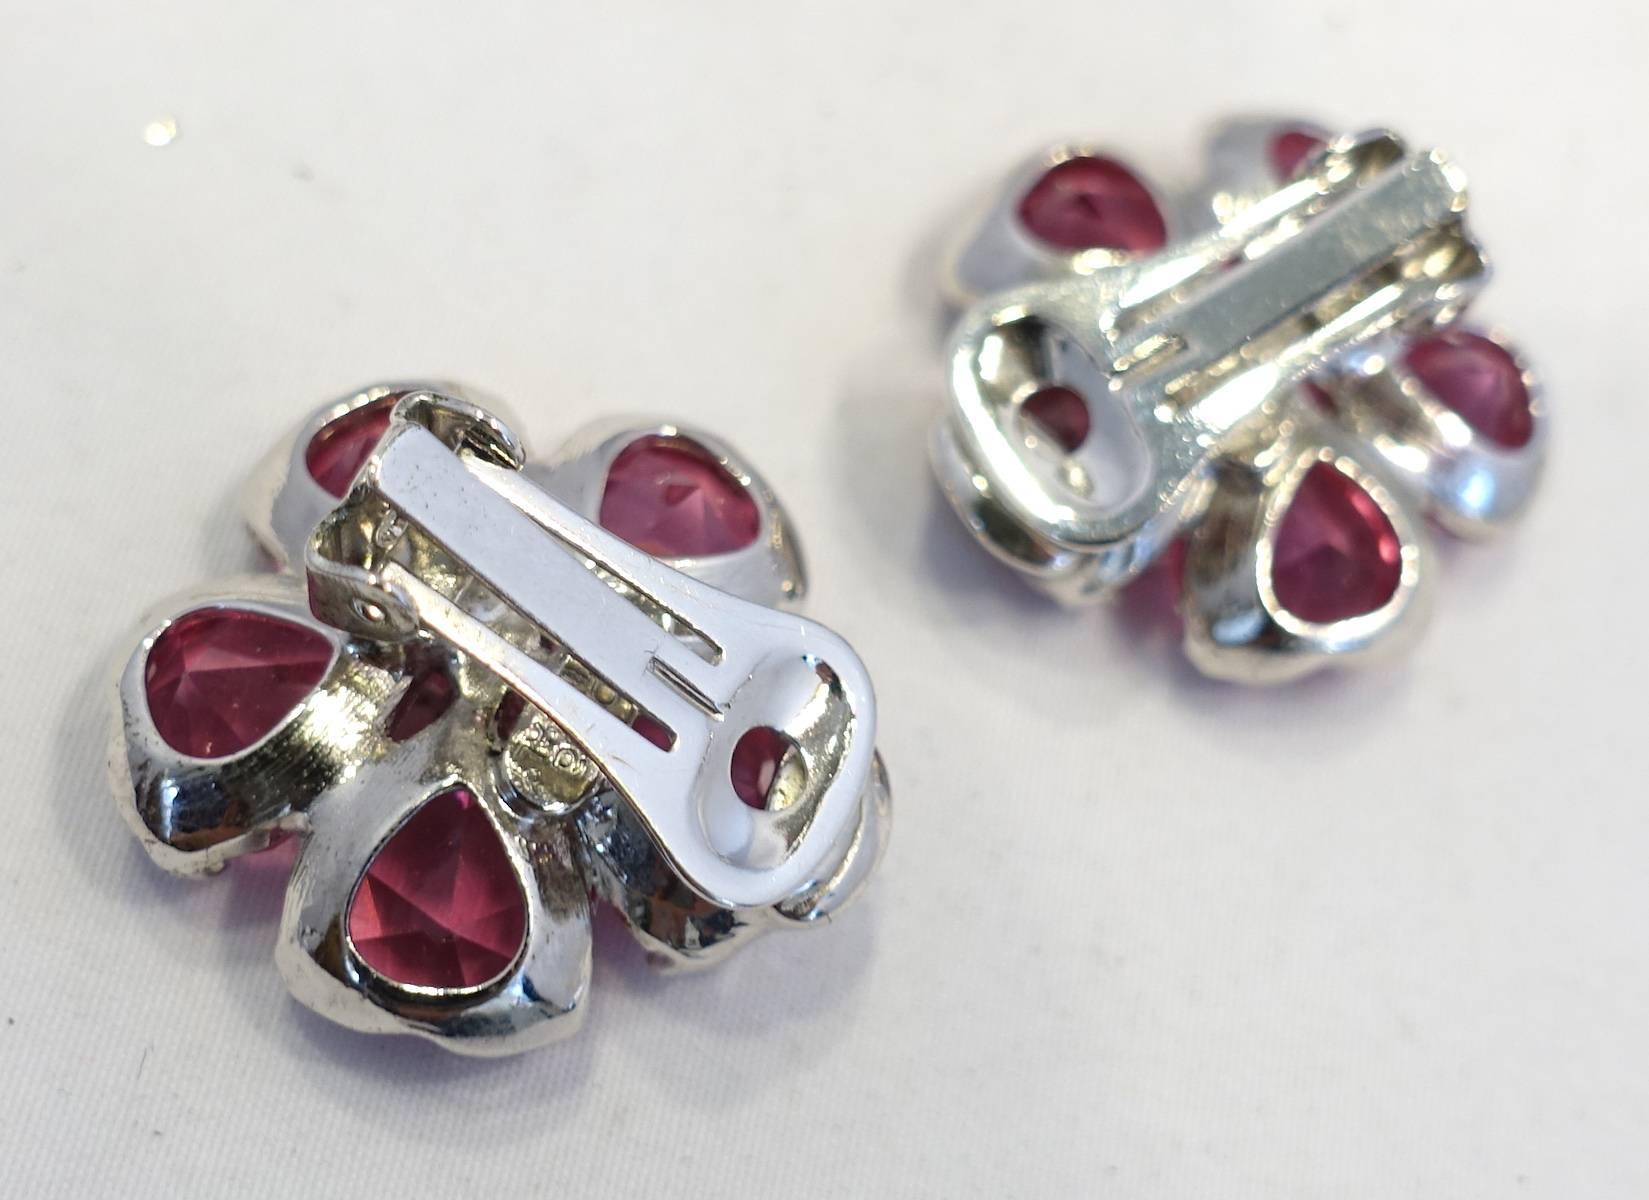 These earrings feature a floral design with hot pink crystal with clear crystal accents in a silver tone setting. These clip earrings measure 1” across and are signed “Replica Made in Italy”.  They are in excellent condition.